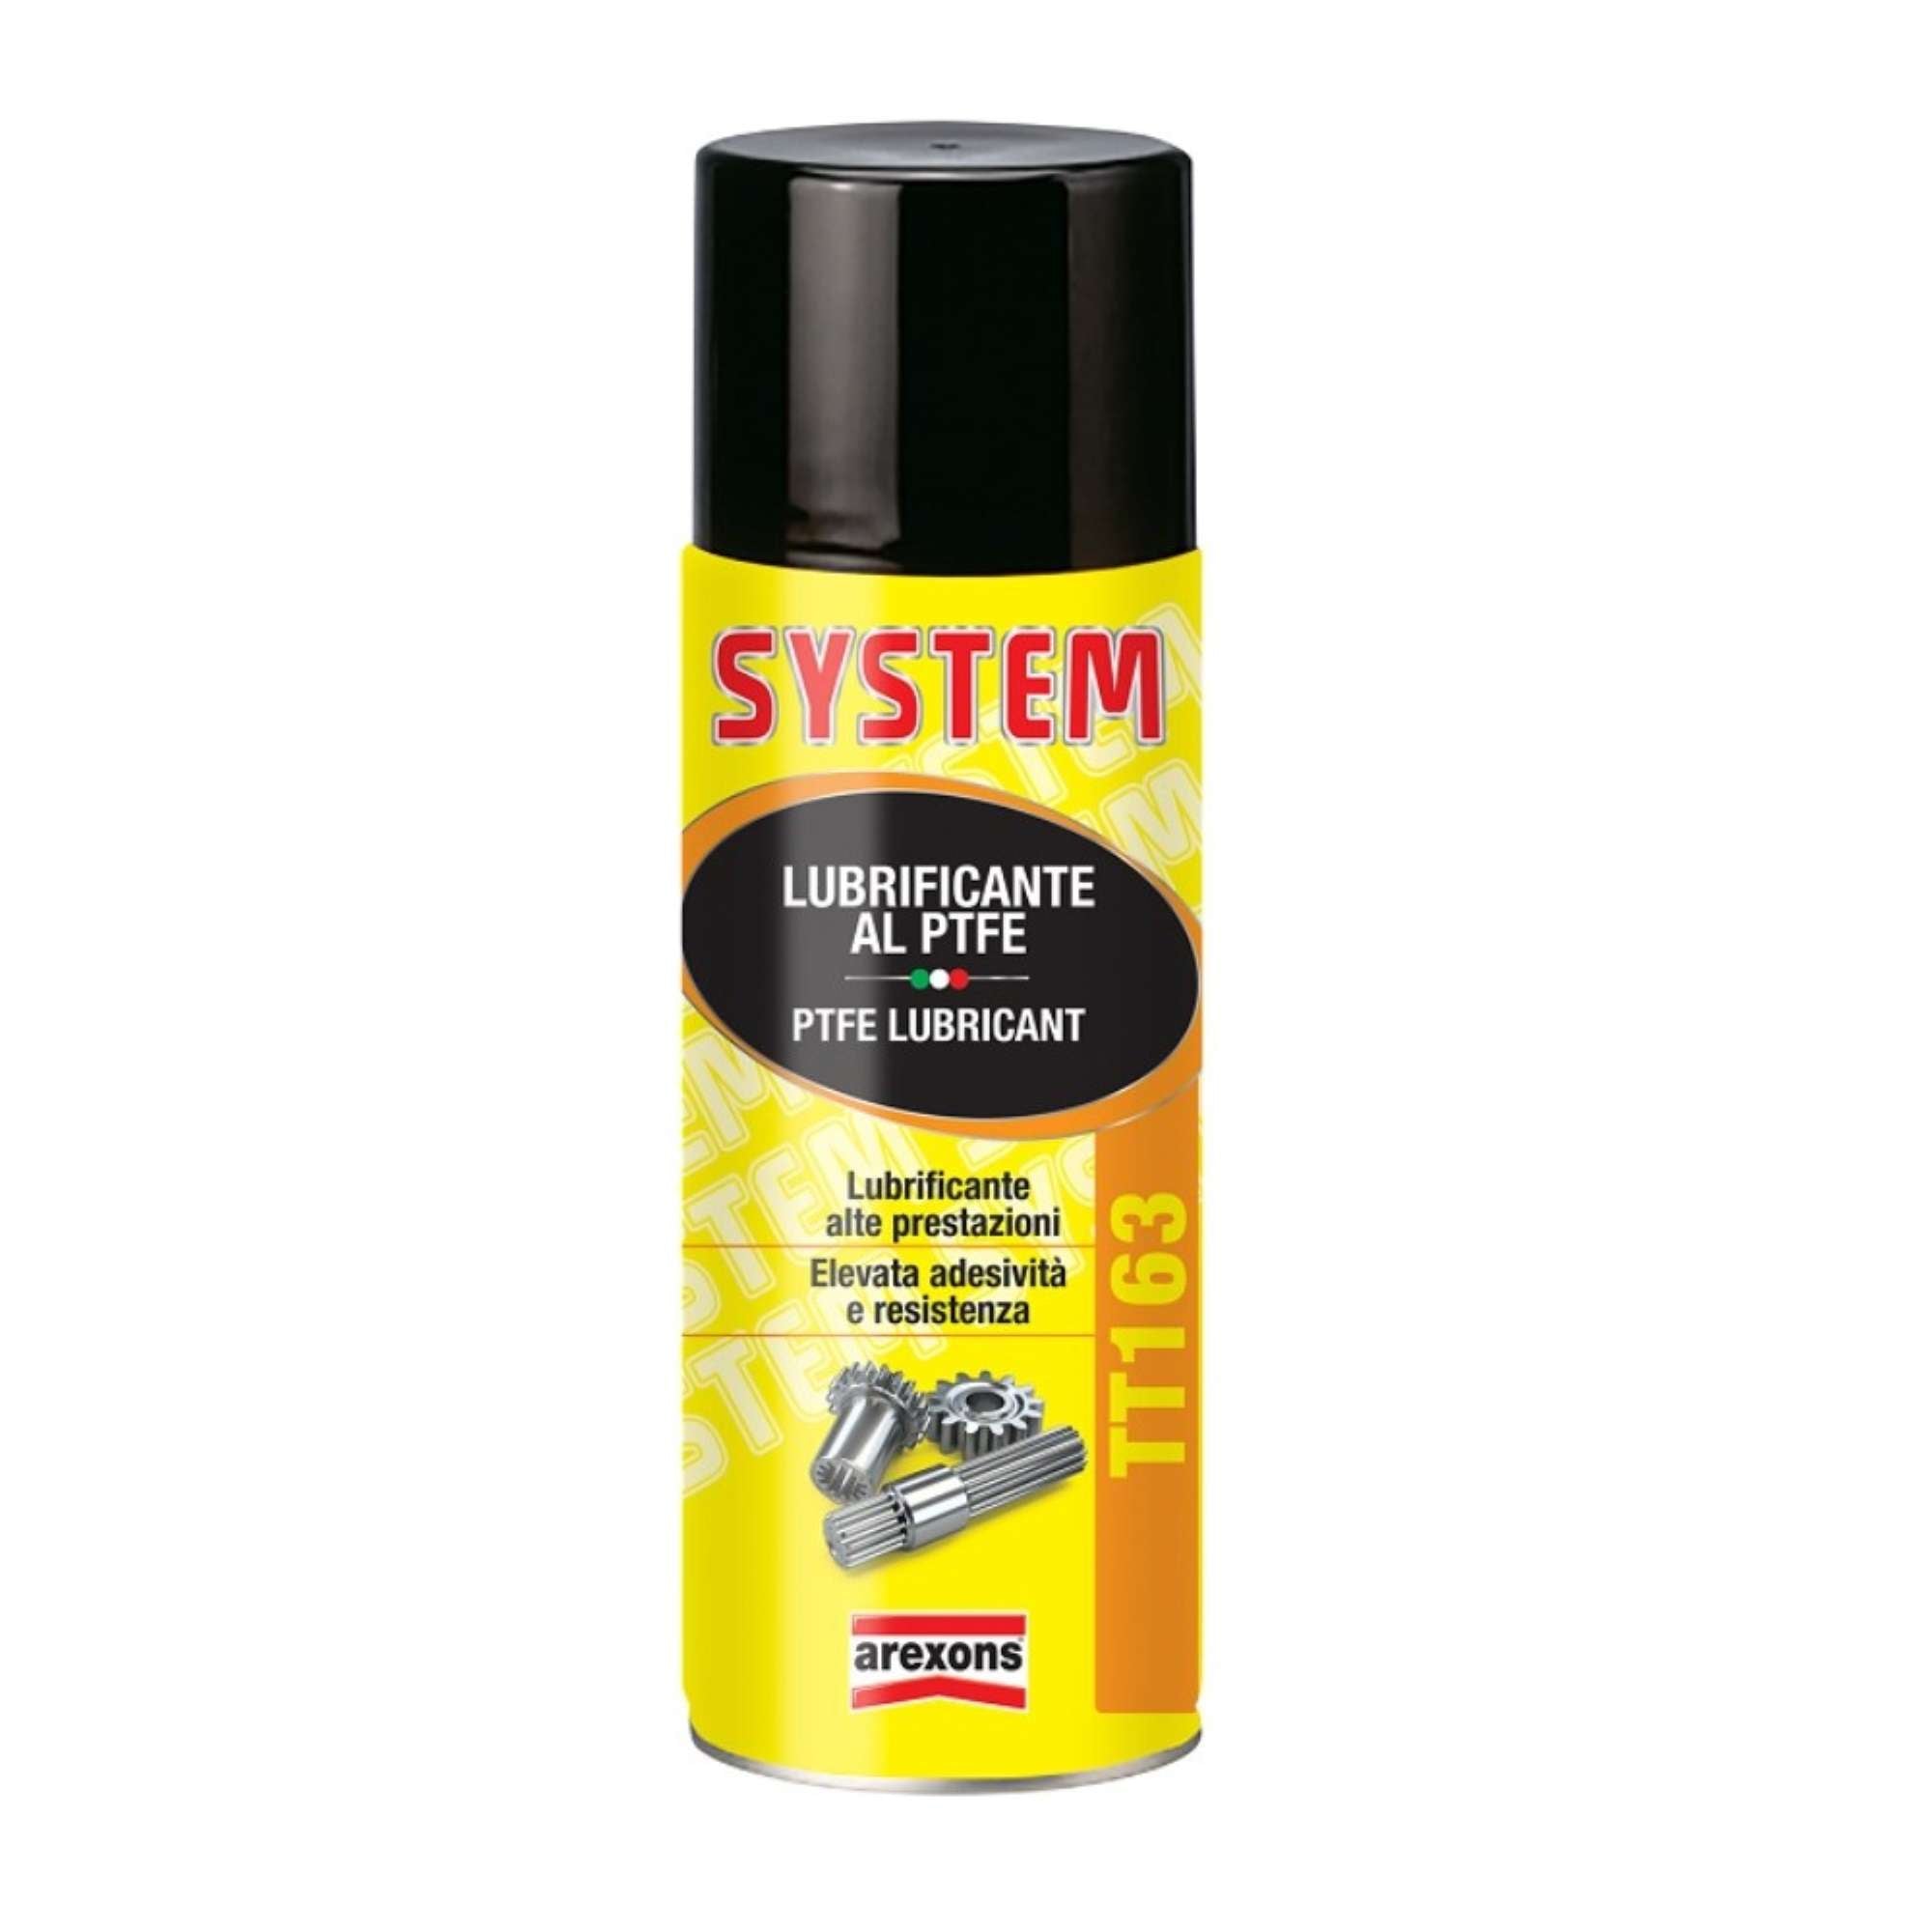 System Tt163 Lubrificante Ptfe - Arexons 4163